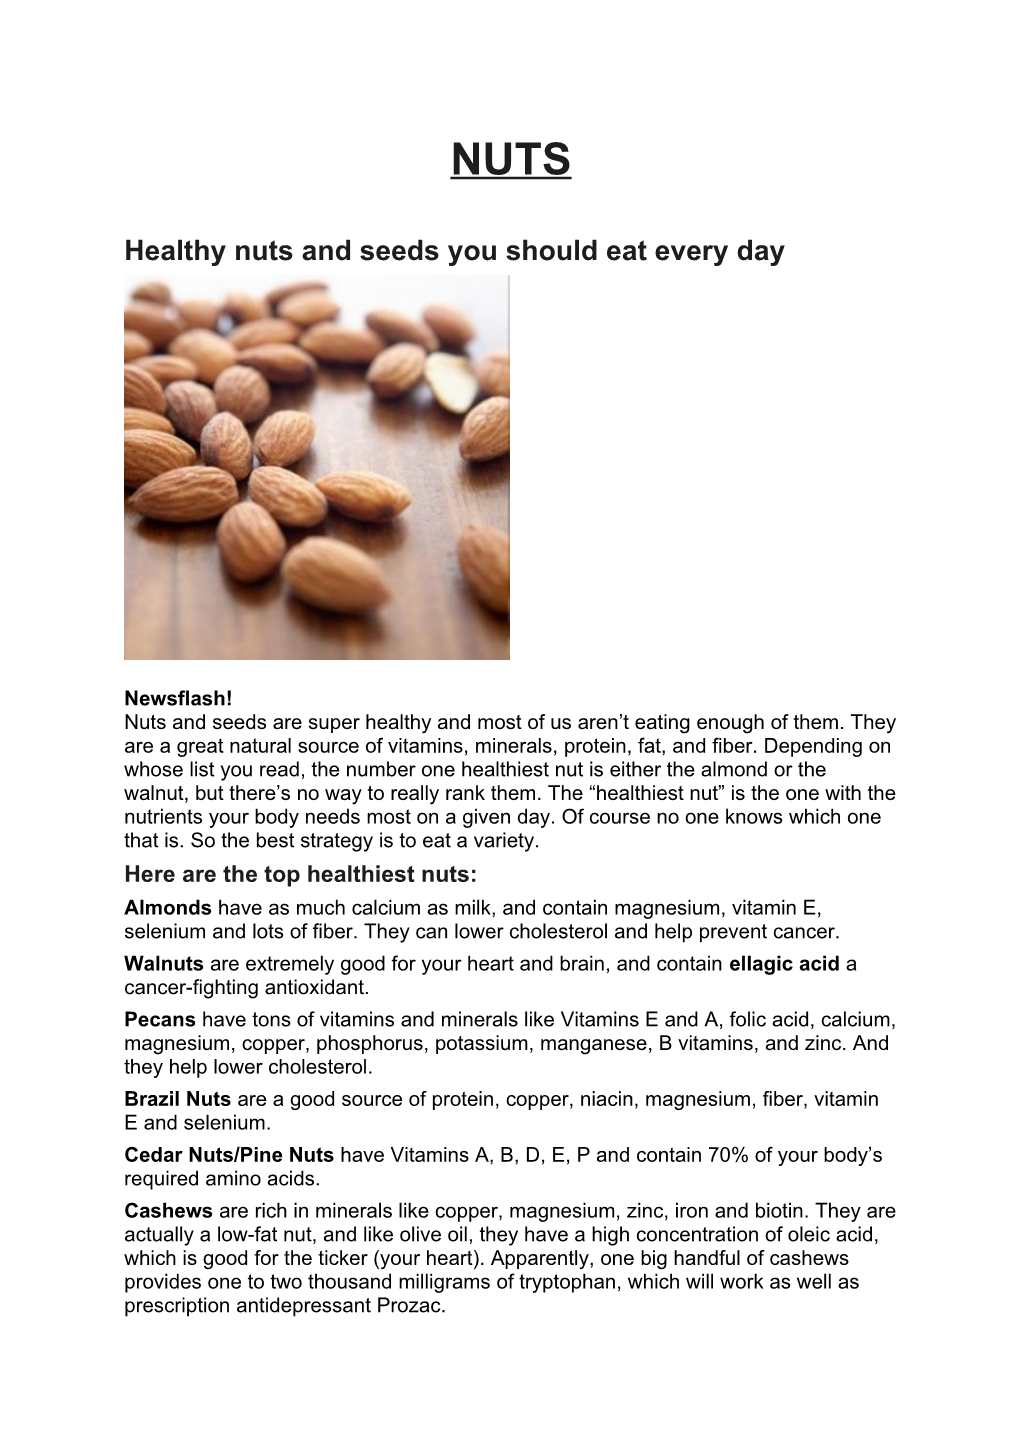 Healthy Nuts and Seeds You Should Eat Every Day